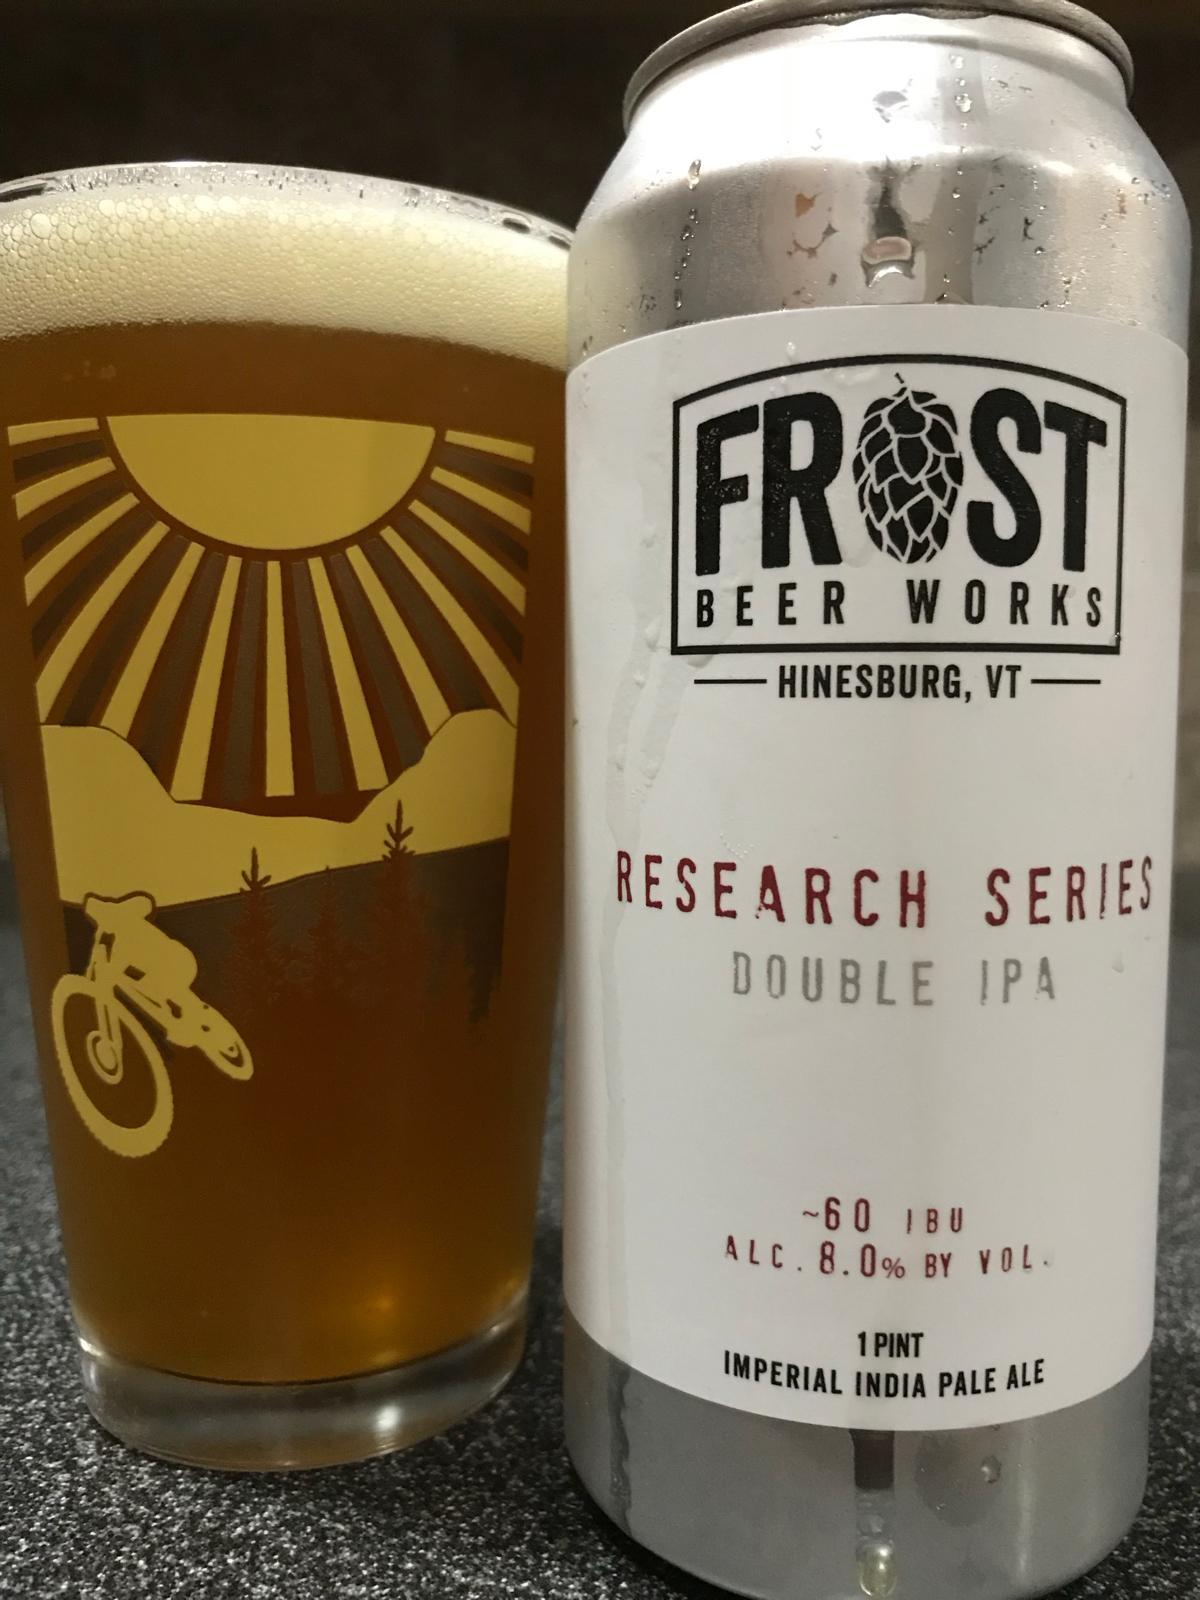 Double IPA - Research Series